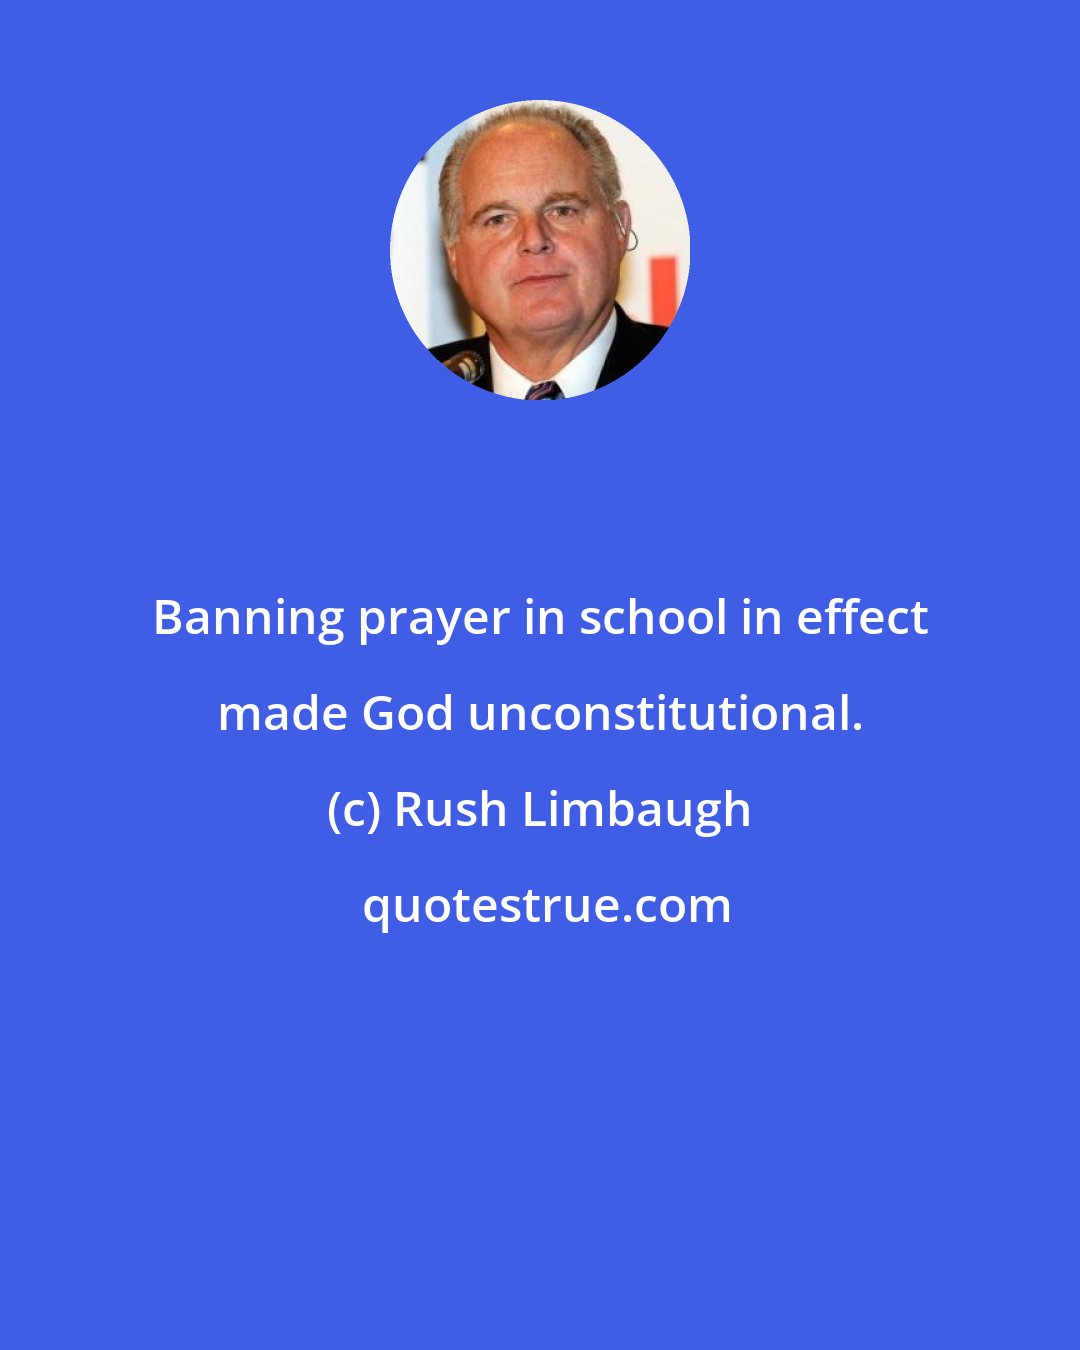 Rush Limbaugh: Banning prayer in school in effect made God unconstitutional.